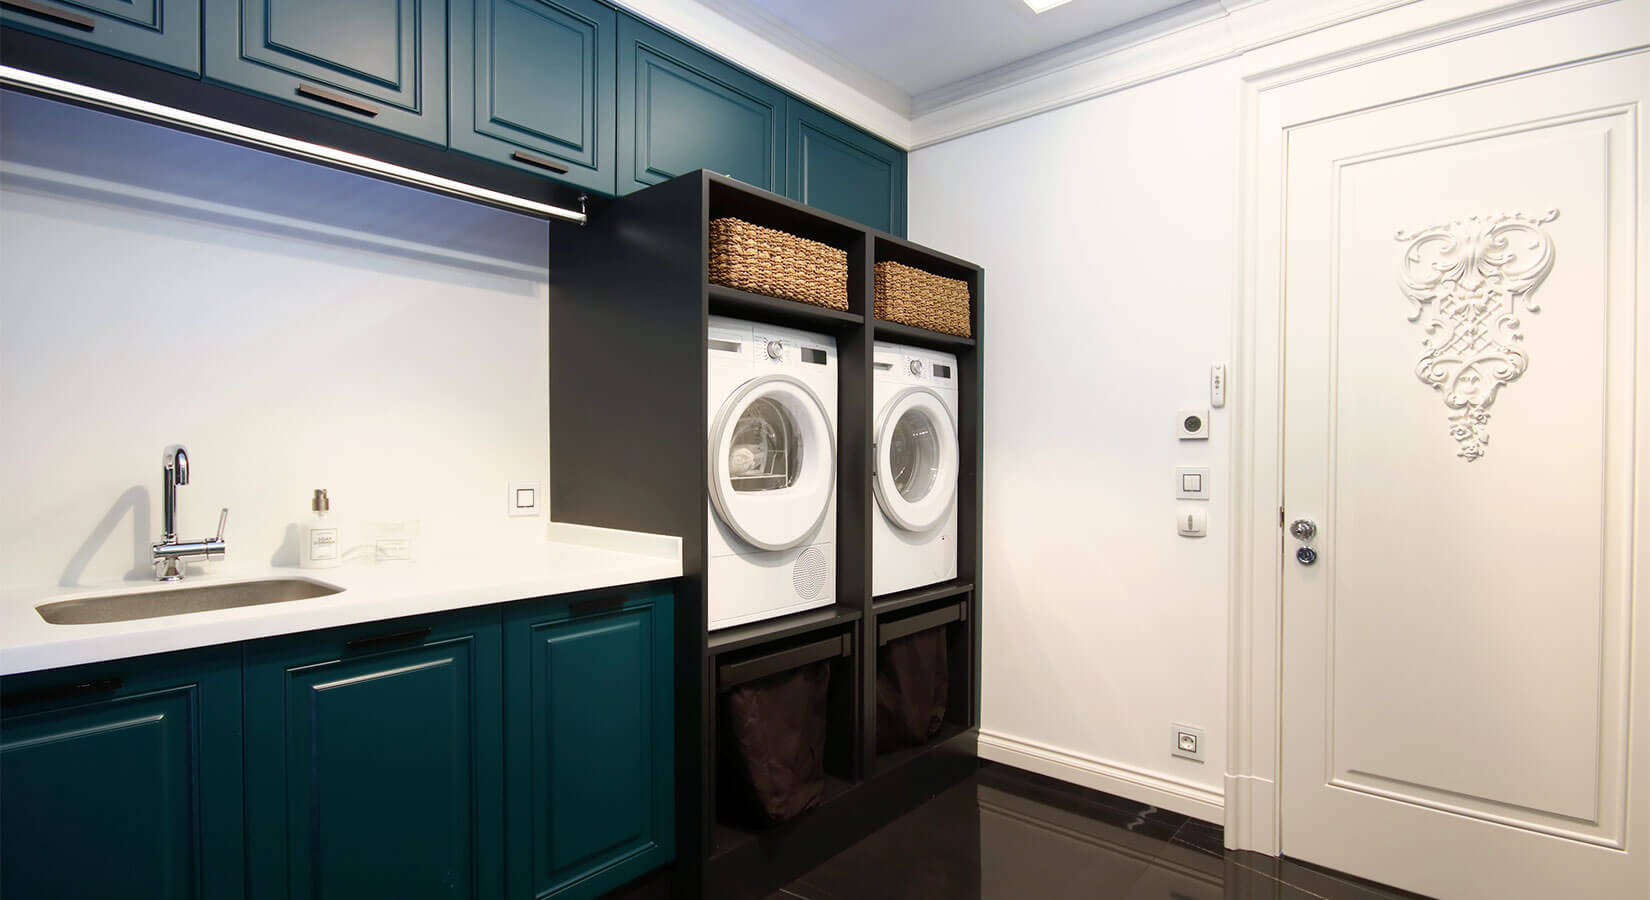 Laundry room with dark teal cabinets, black open cabinets, and white countertop.